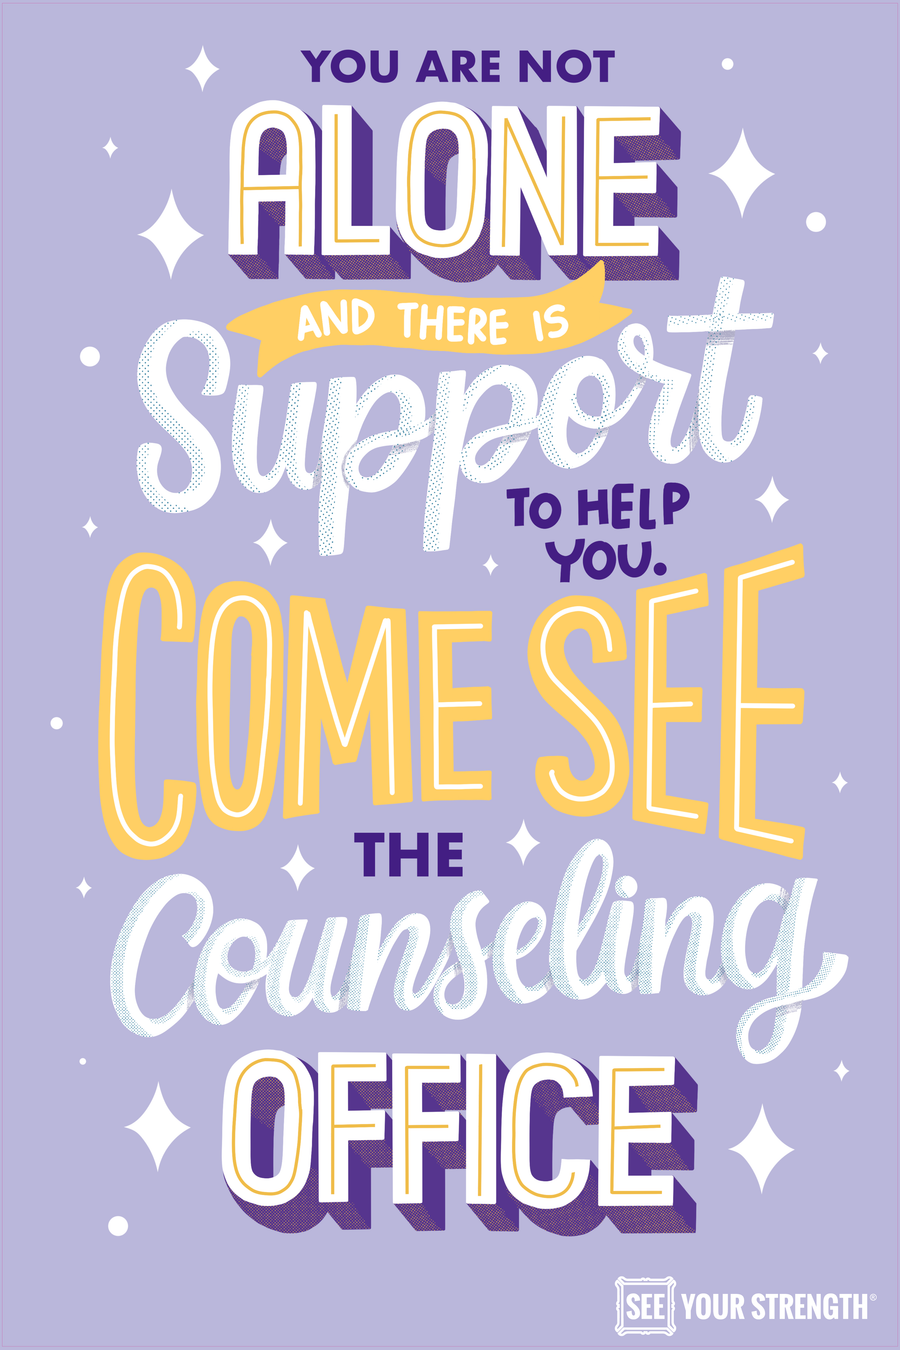 You are not alone and there is support to help you. Come see the counseling office